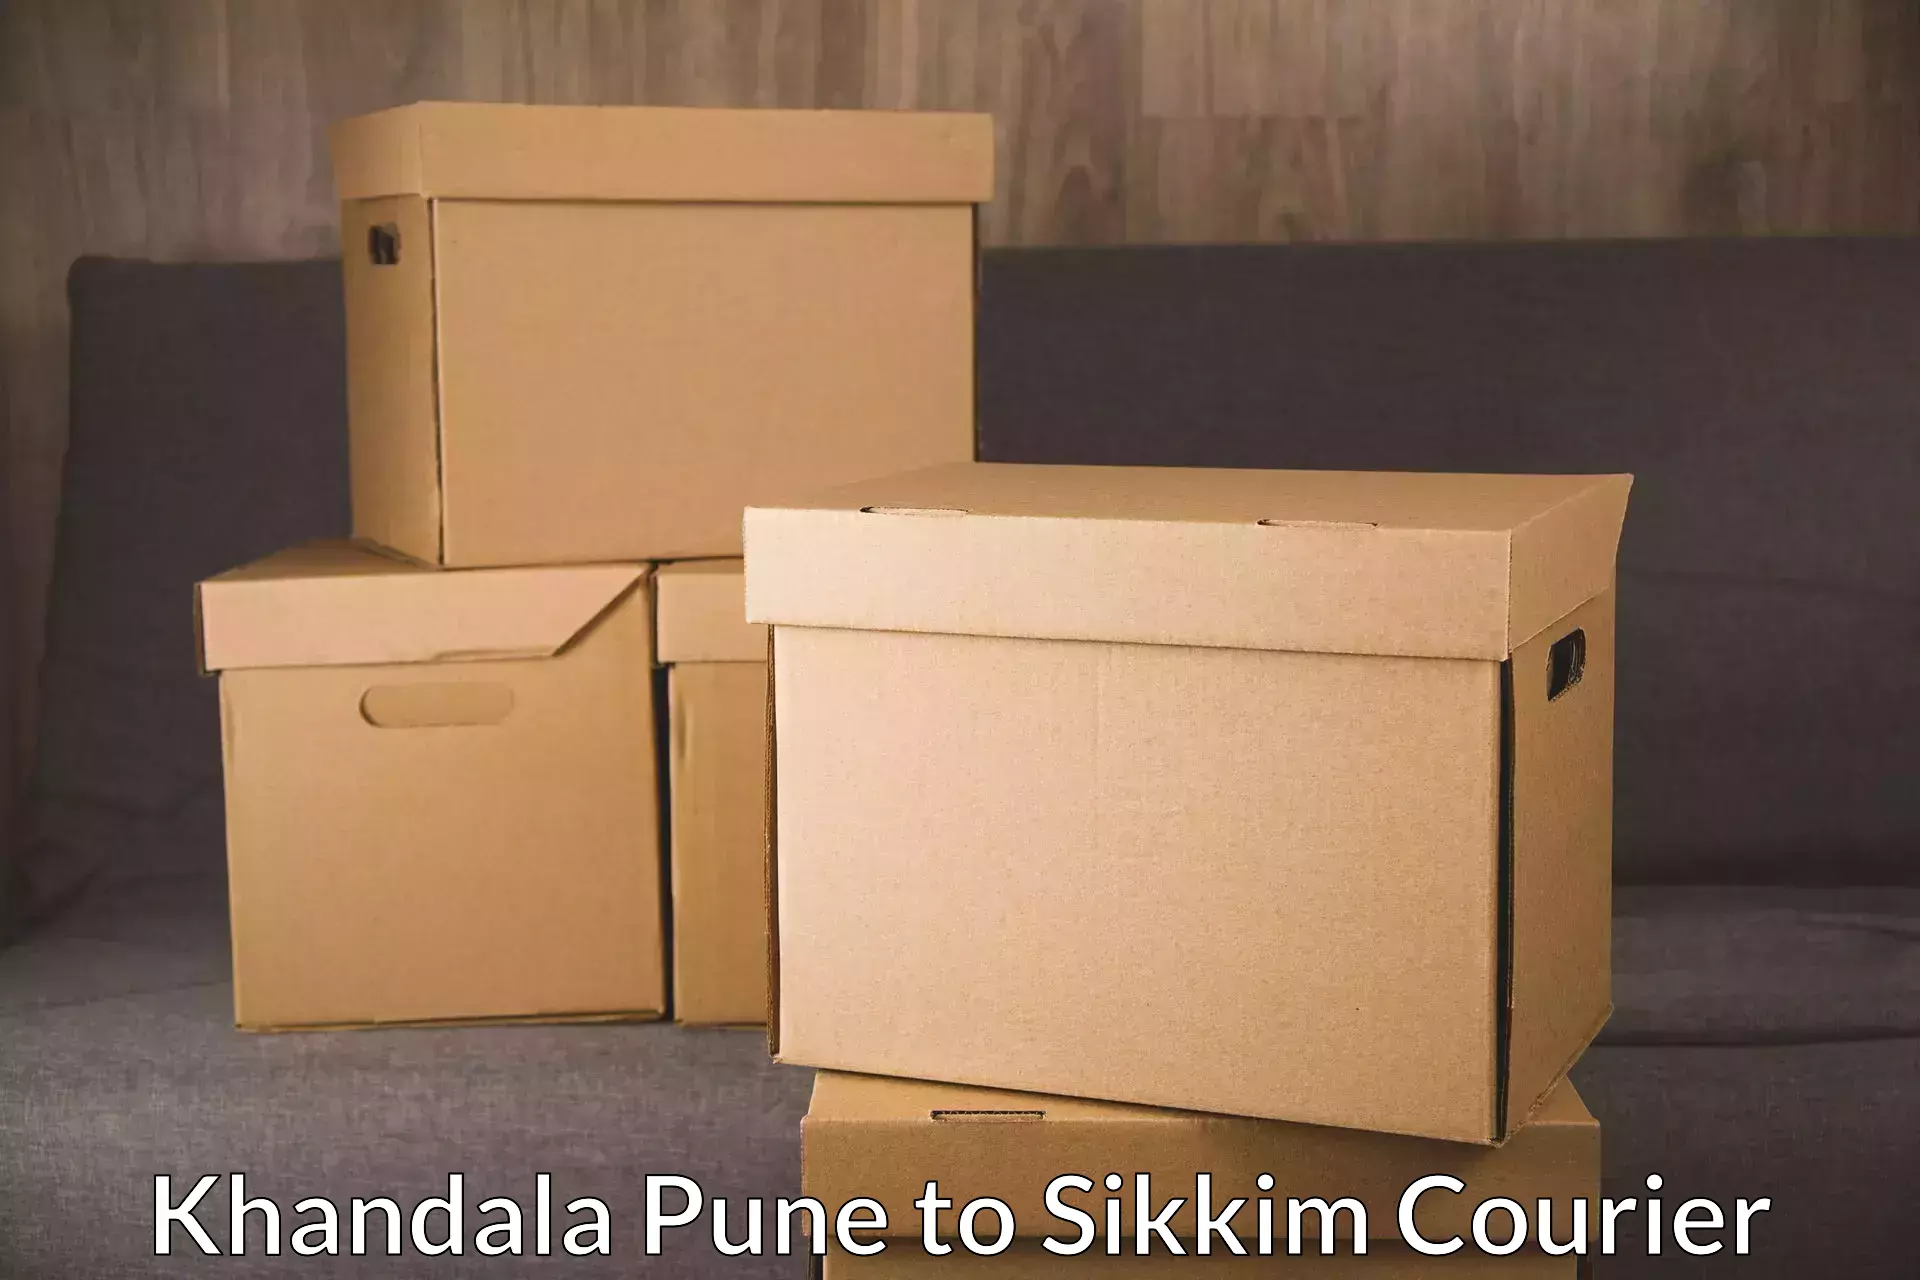 Next-day delivery options in Khandala Pune to Pelling